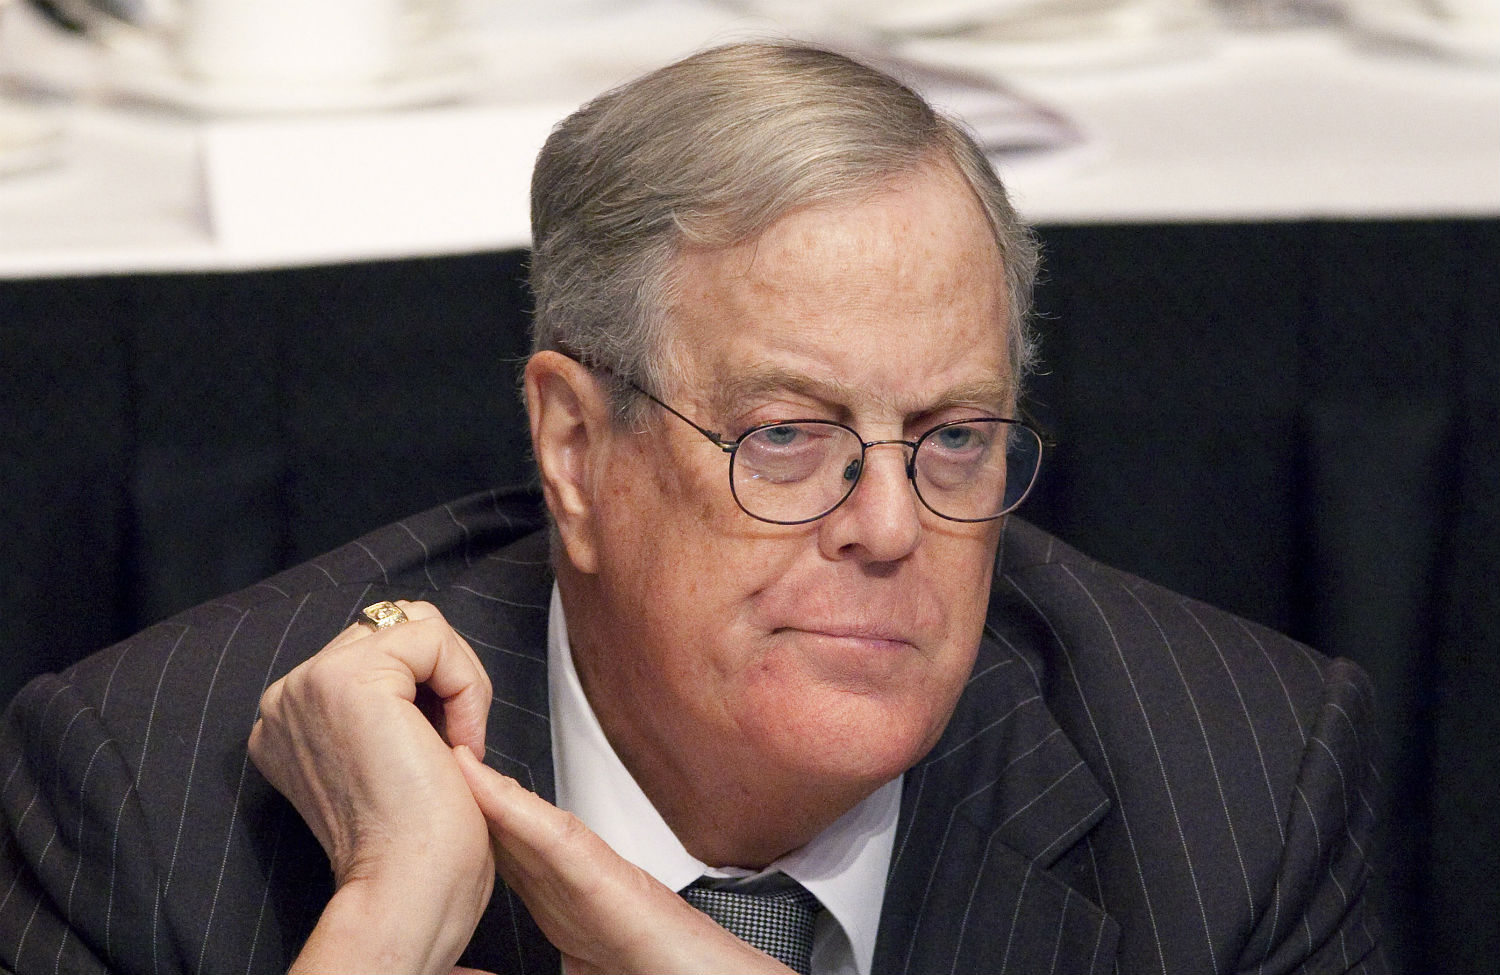 What’s Really Behind the Koch Attacks on Democrats